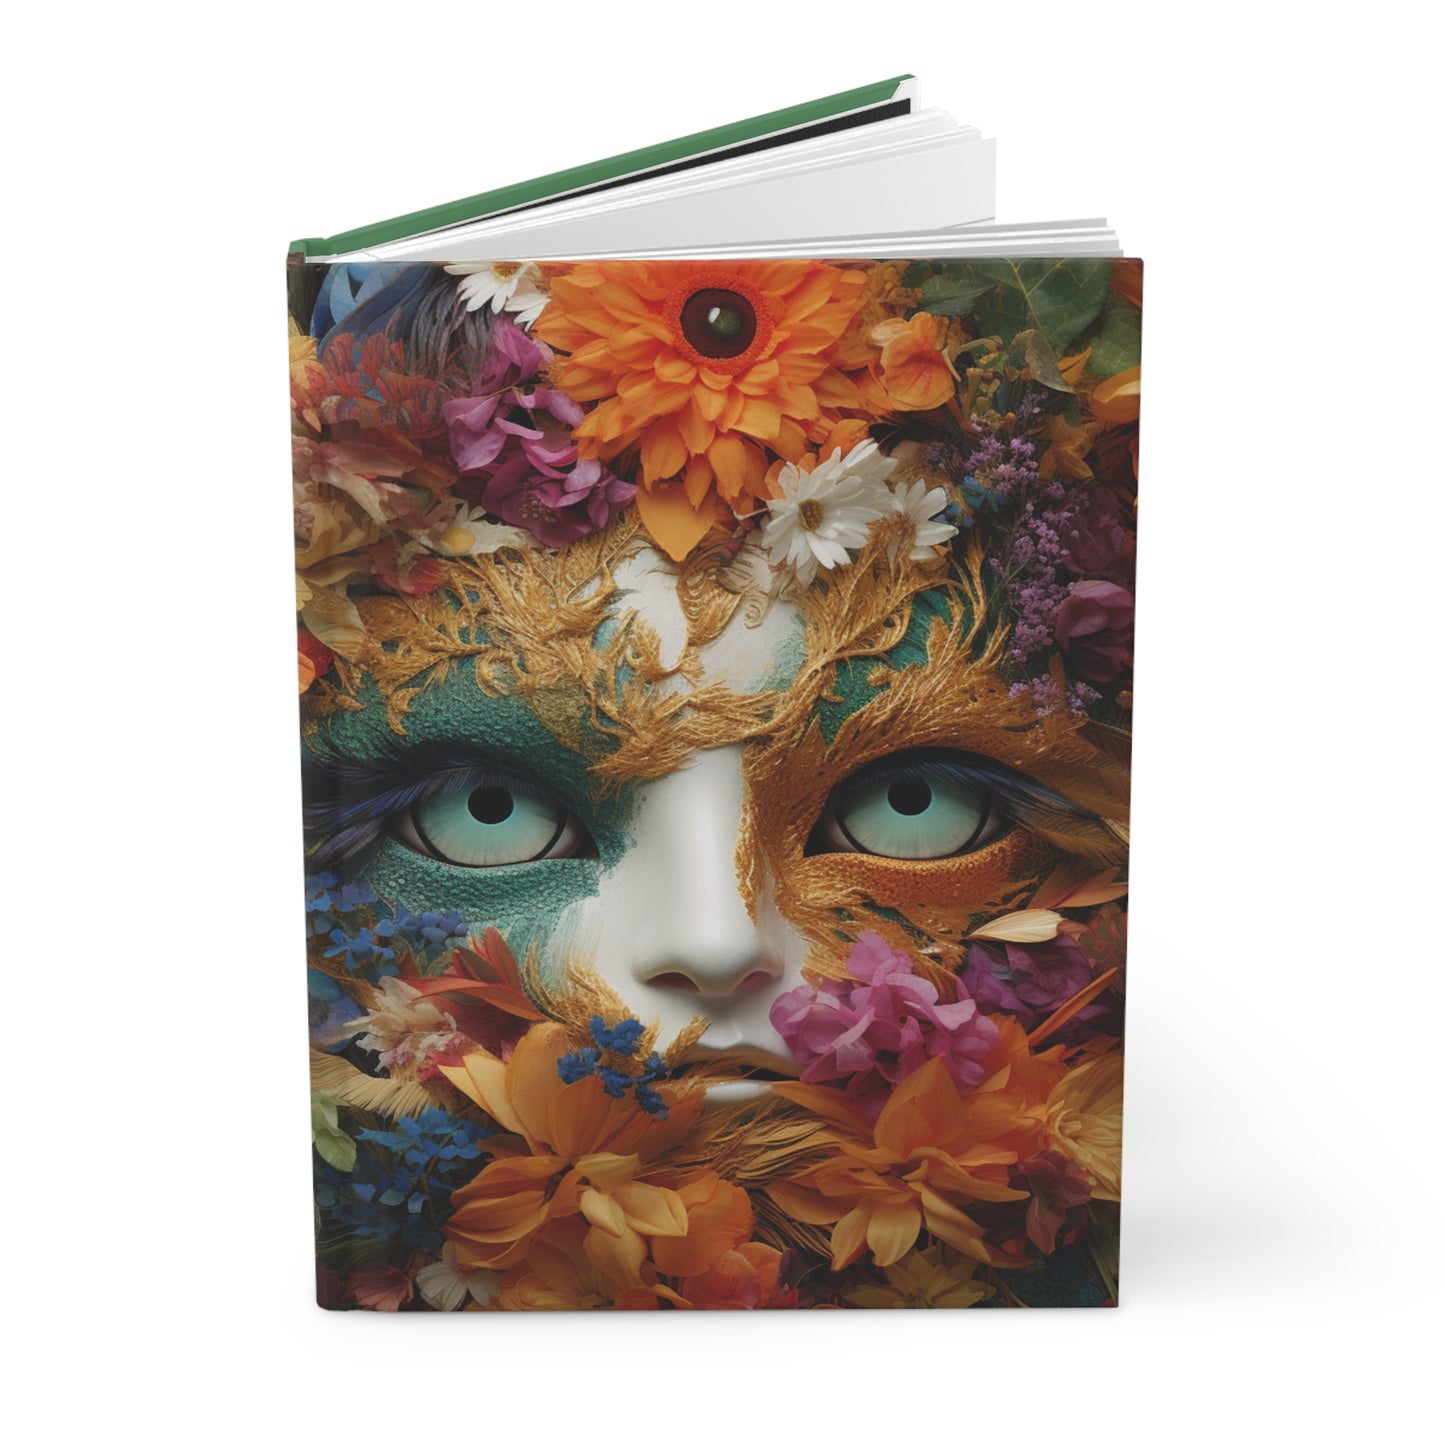 Floral Annoyed Face Hardcover Notebook - Unique Journal with Lined Pages, Creative Diary, Gift for Writers and Artists, 5.75"x7.5" Size